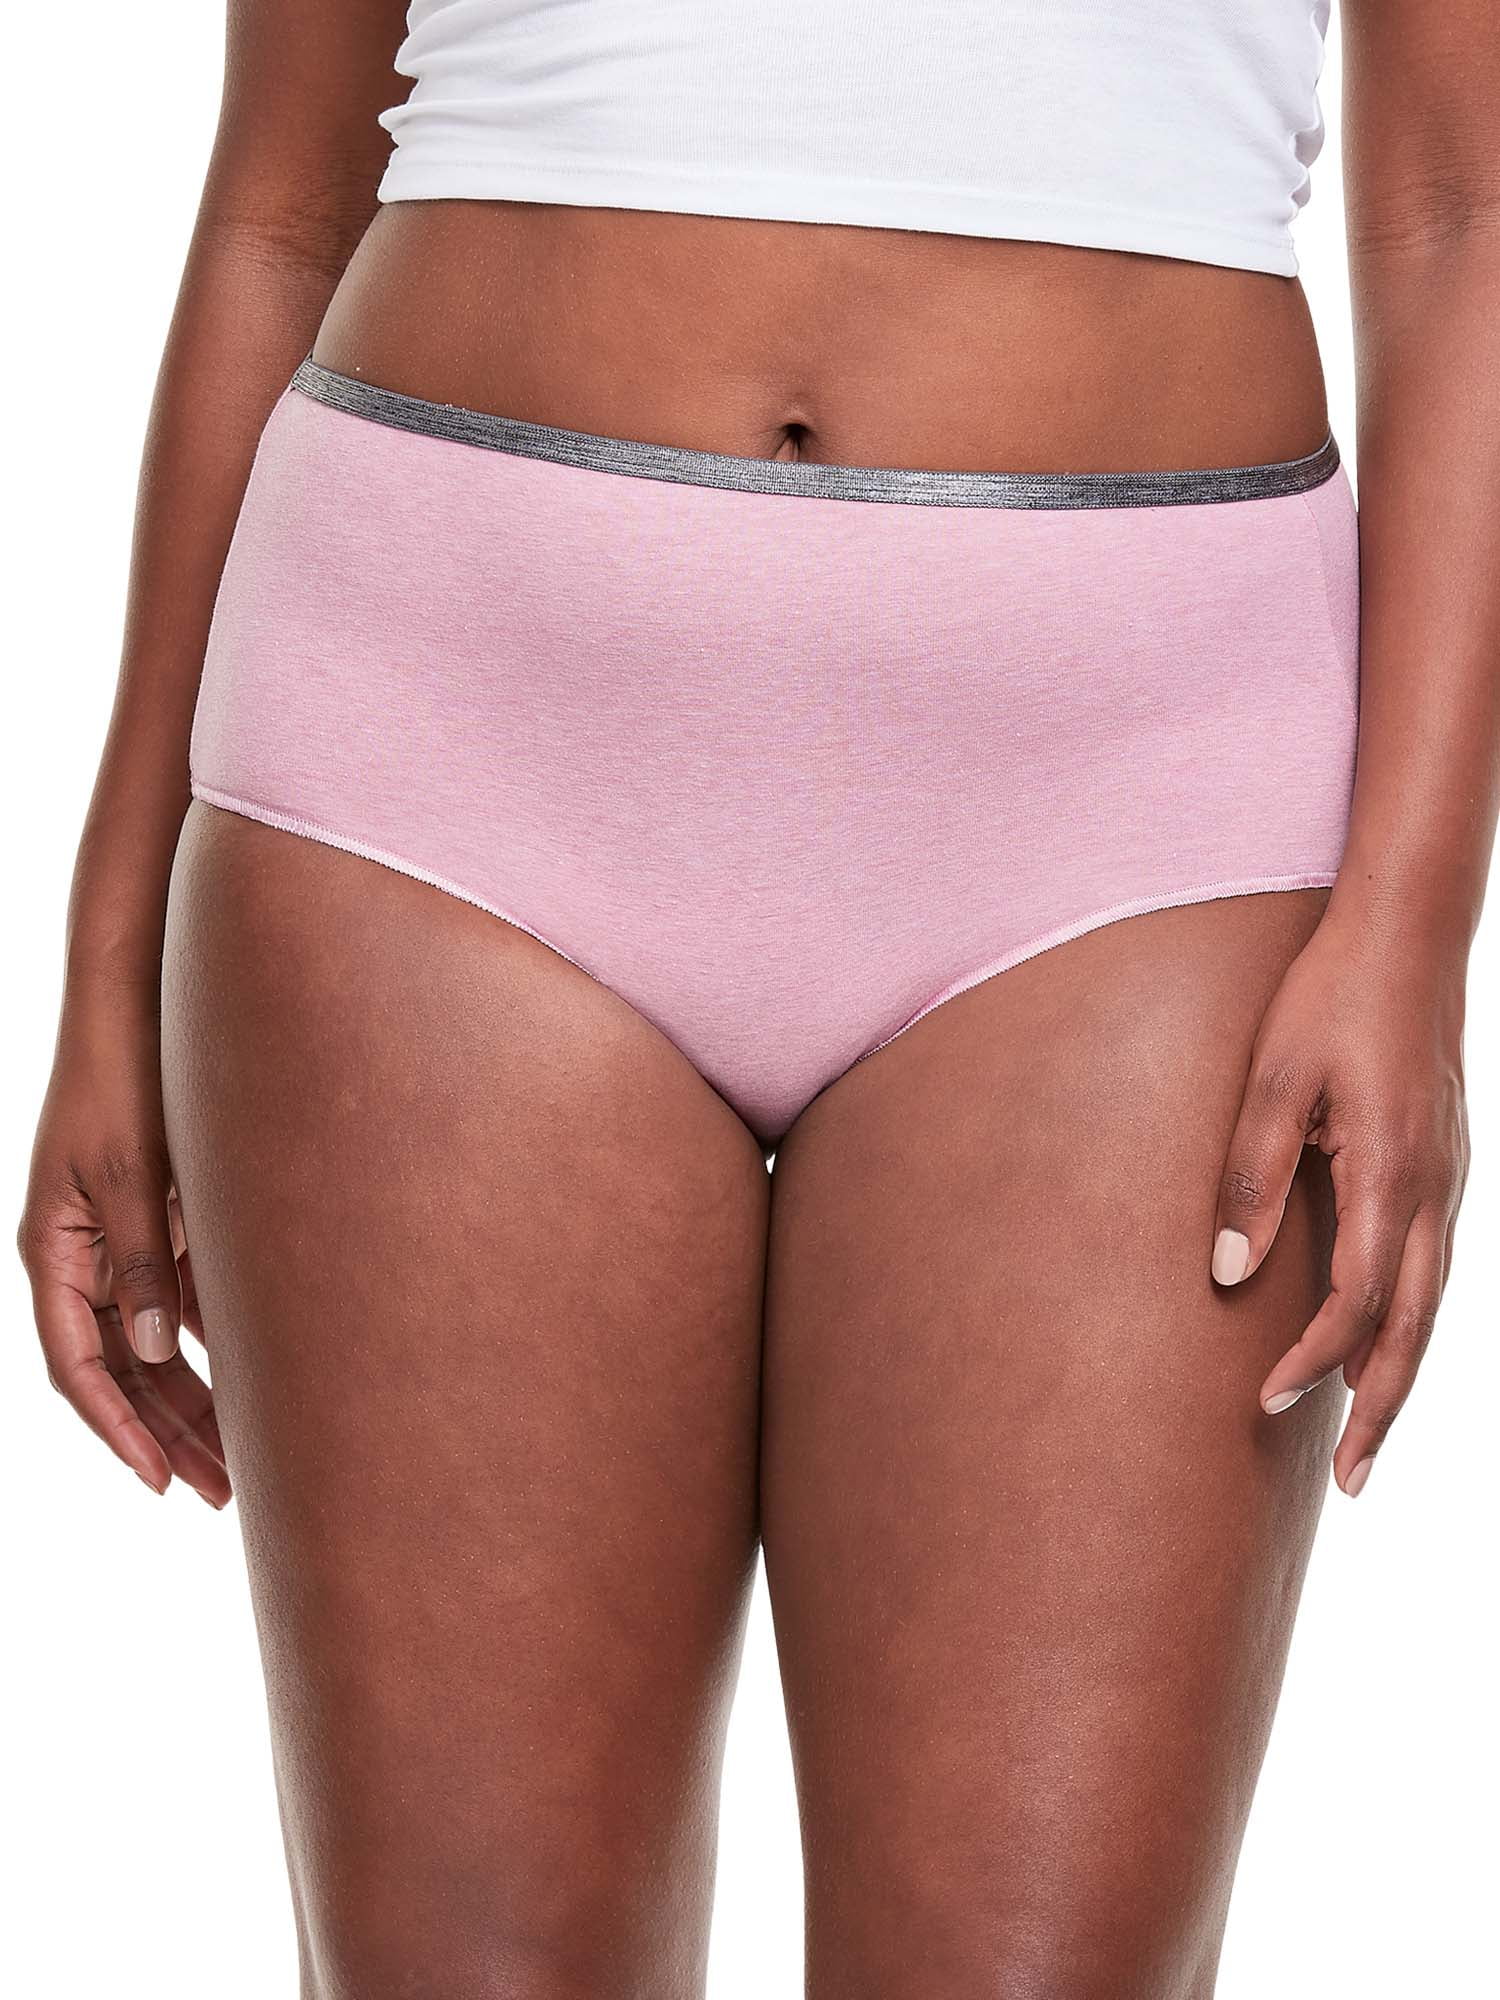 Cool Comfort Cotton Brief Panty - 10 Pack